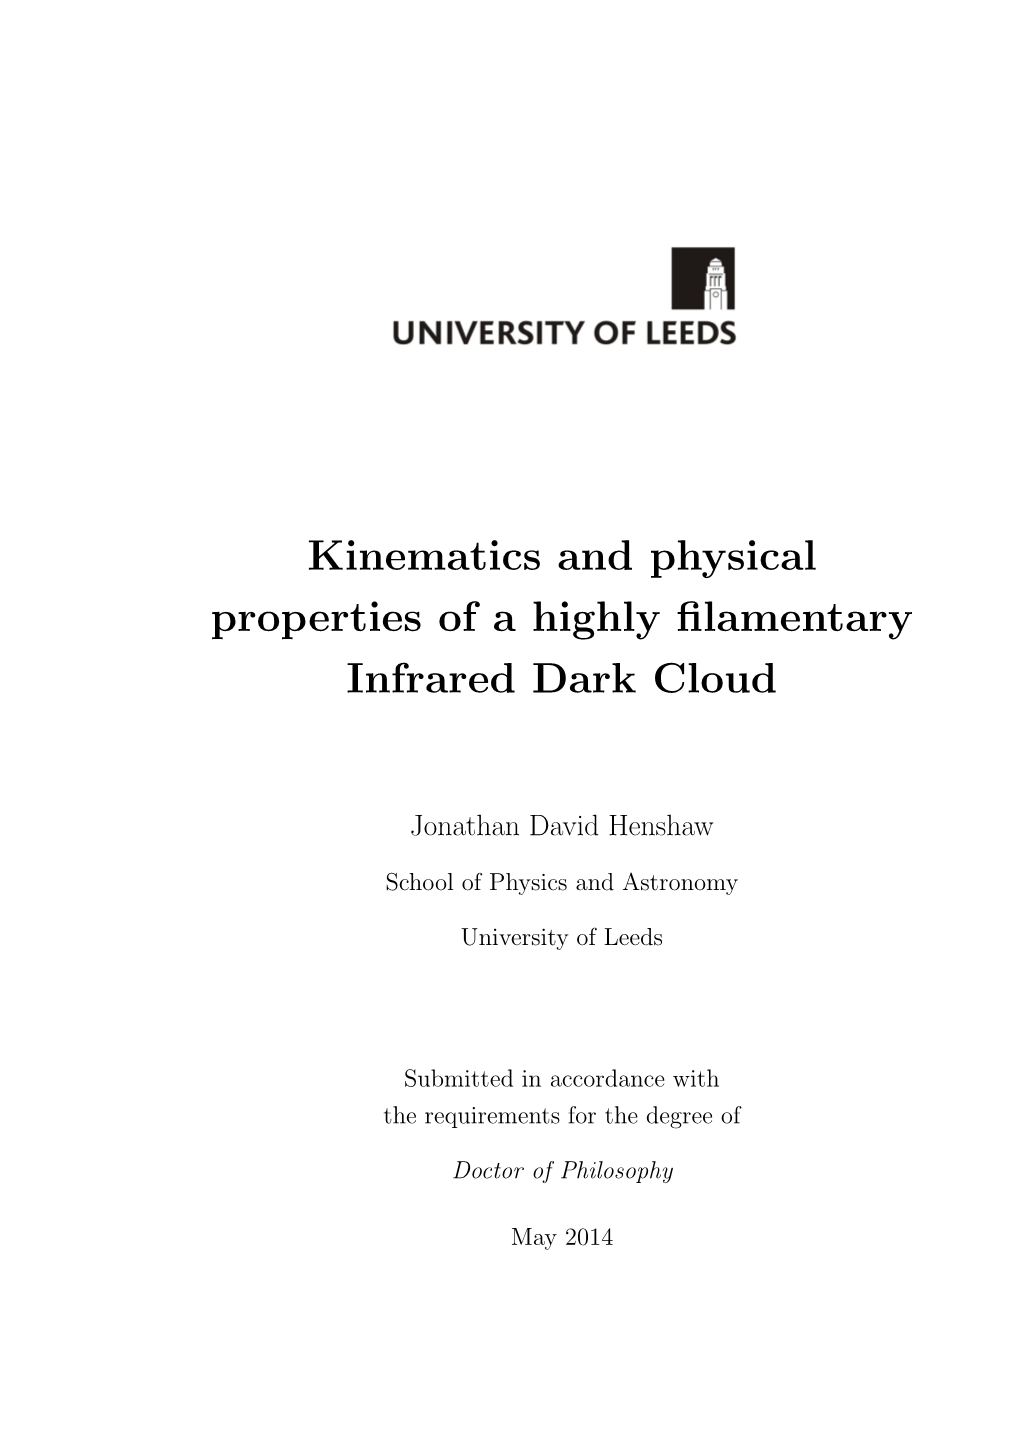 Kinematics and Physical Properties of a Highly Filamentary Infrared Dark